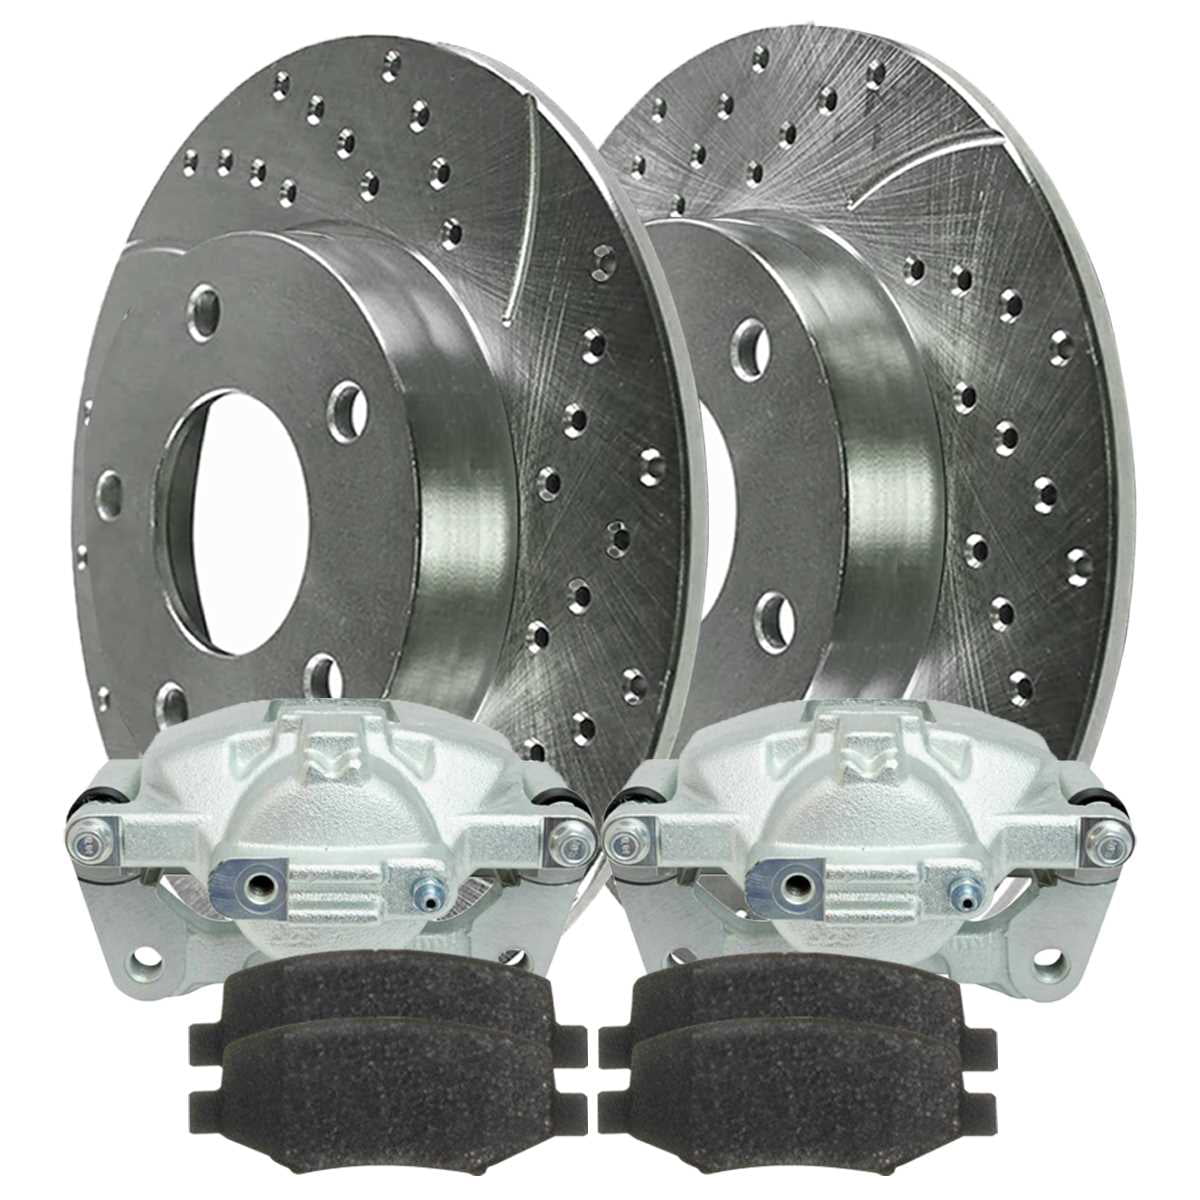 AutoShack BRKPKG100238 Front & Rear Set of Calipers w/Drilled Slotted Performance Rotors & Ceramic Brake Pads Set Replacement for 2007 2008 2009 2010 2011 2012 Jeep Wrangler 3.6L 3.8L V6 4WD RWD